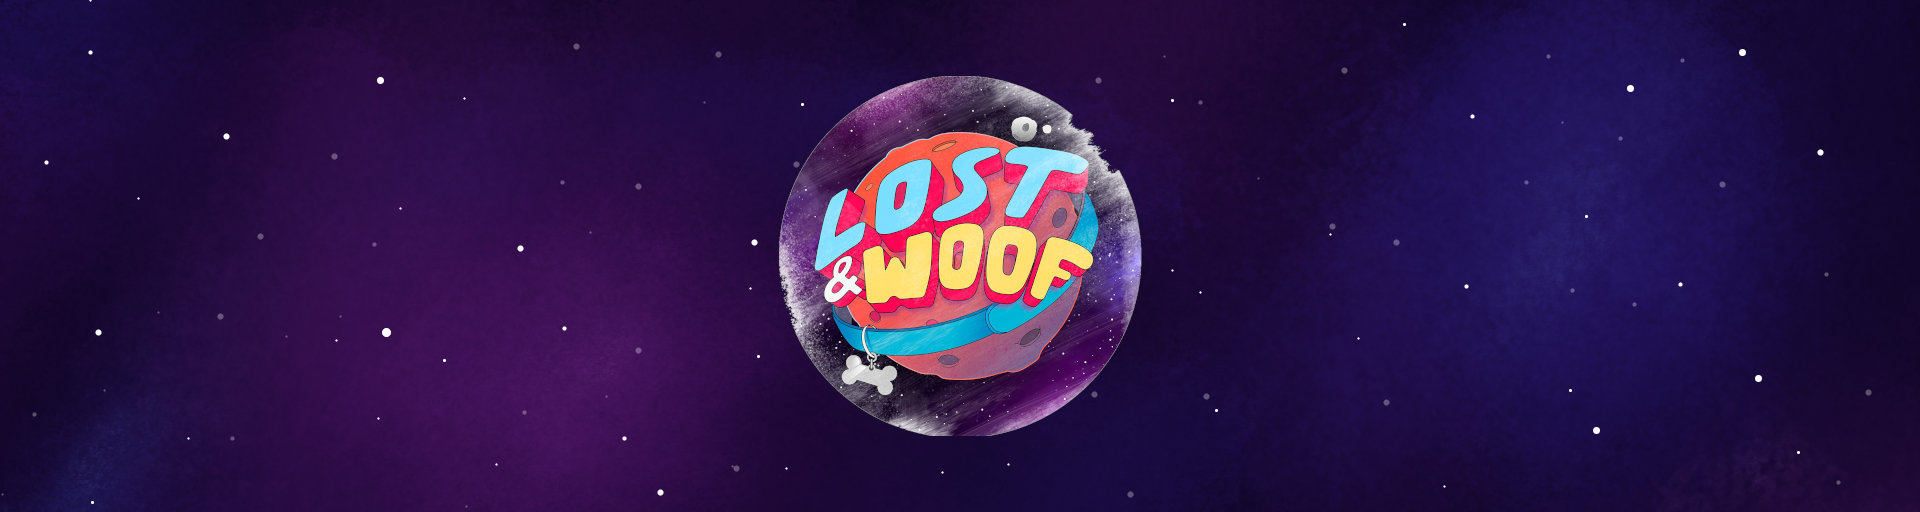 Lost & Woof